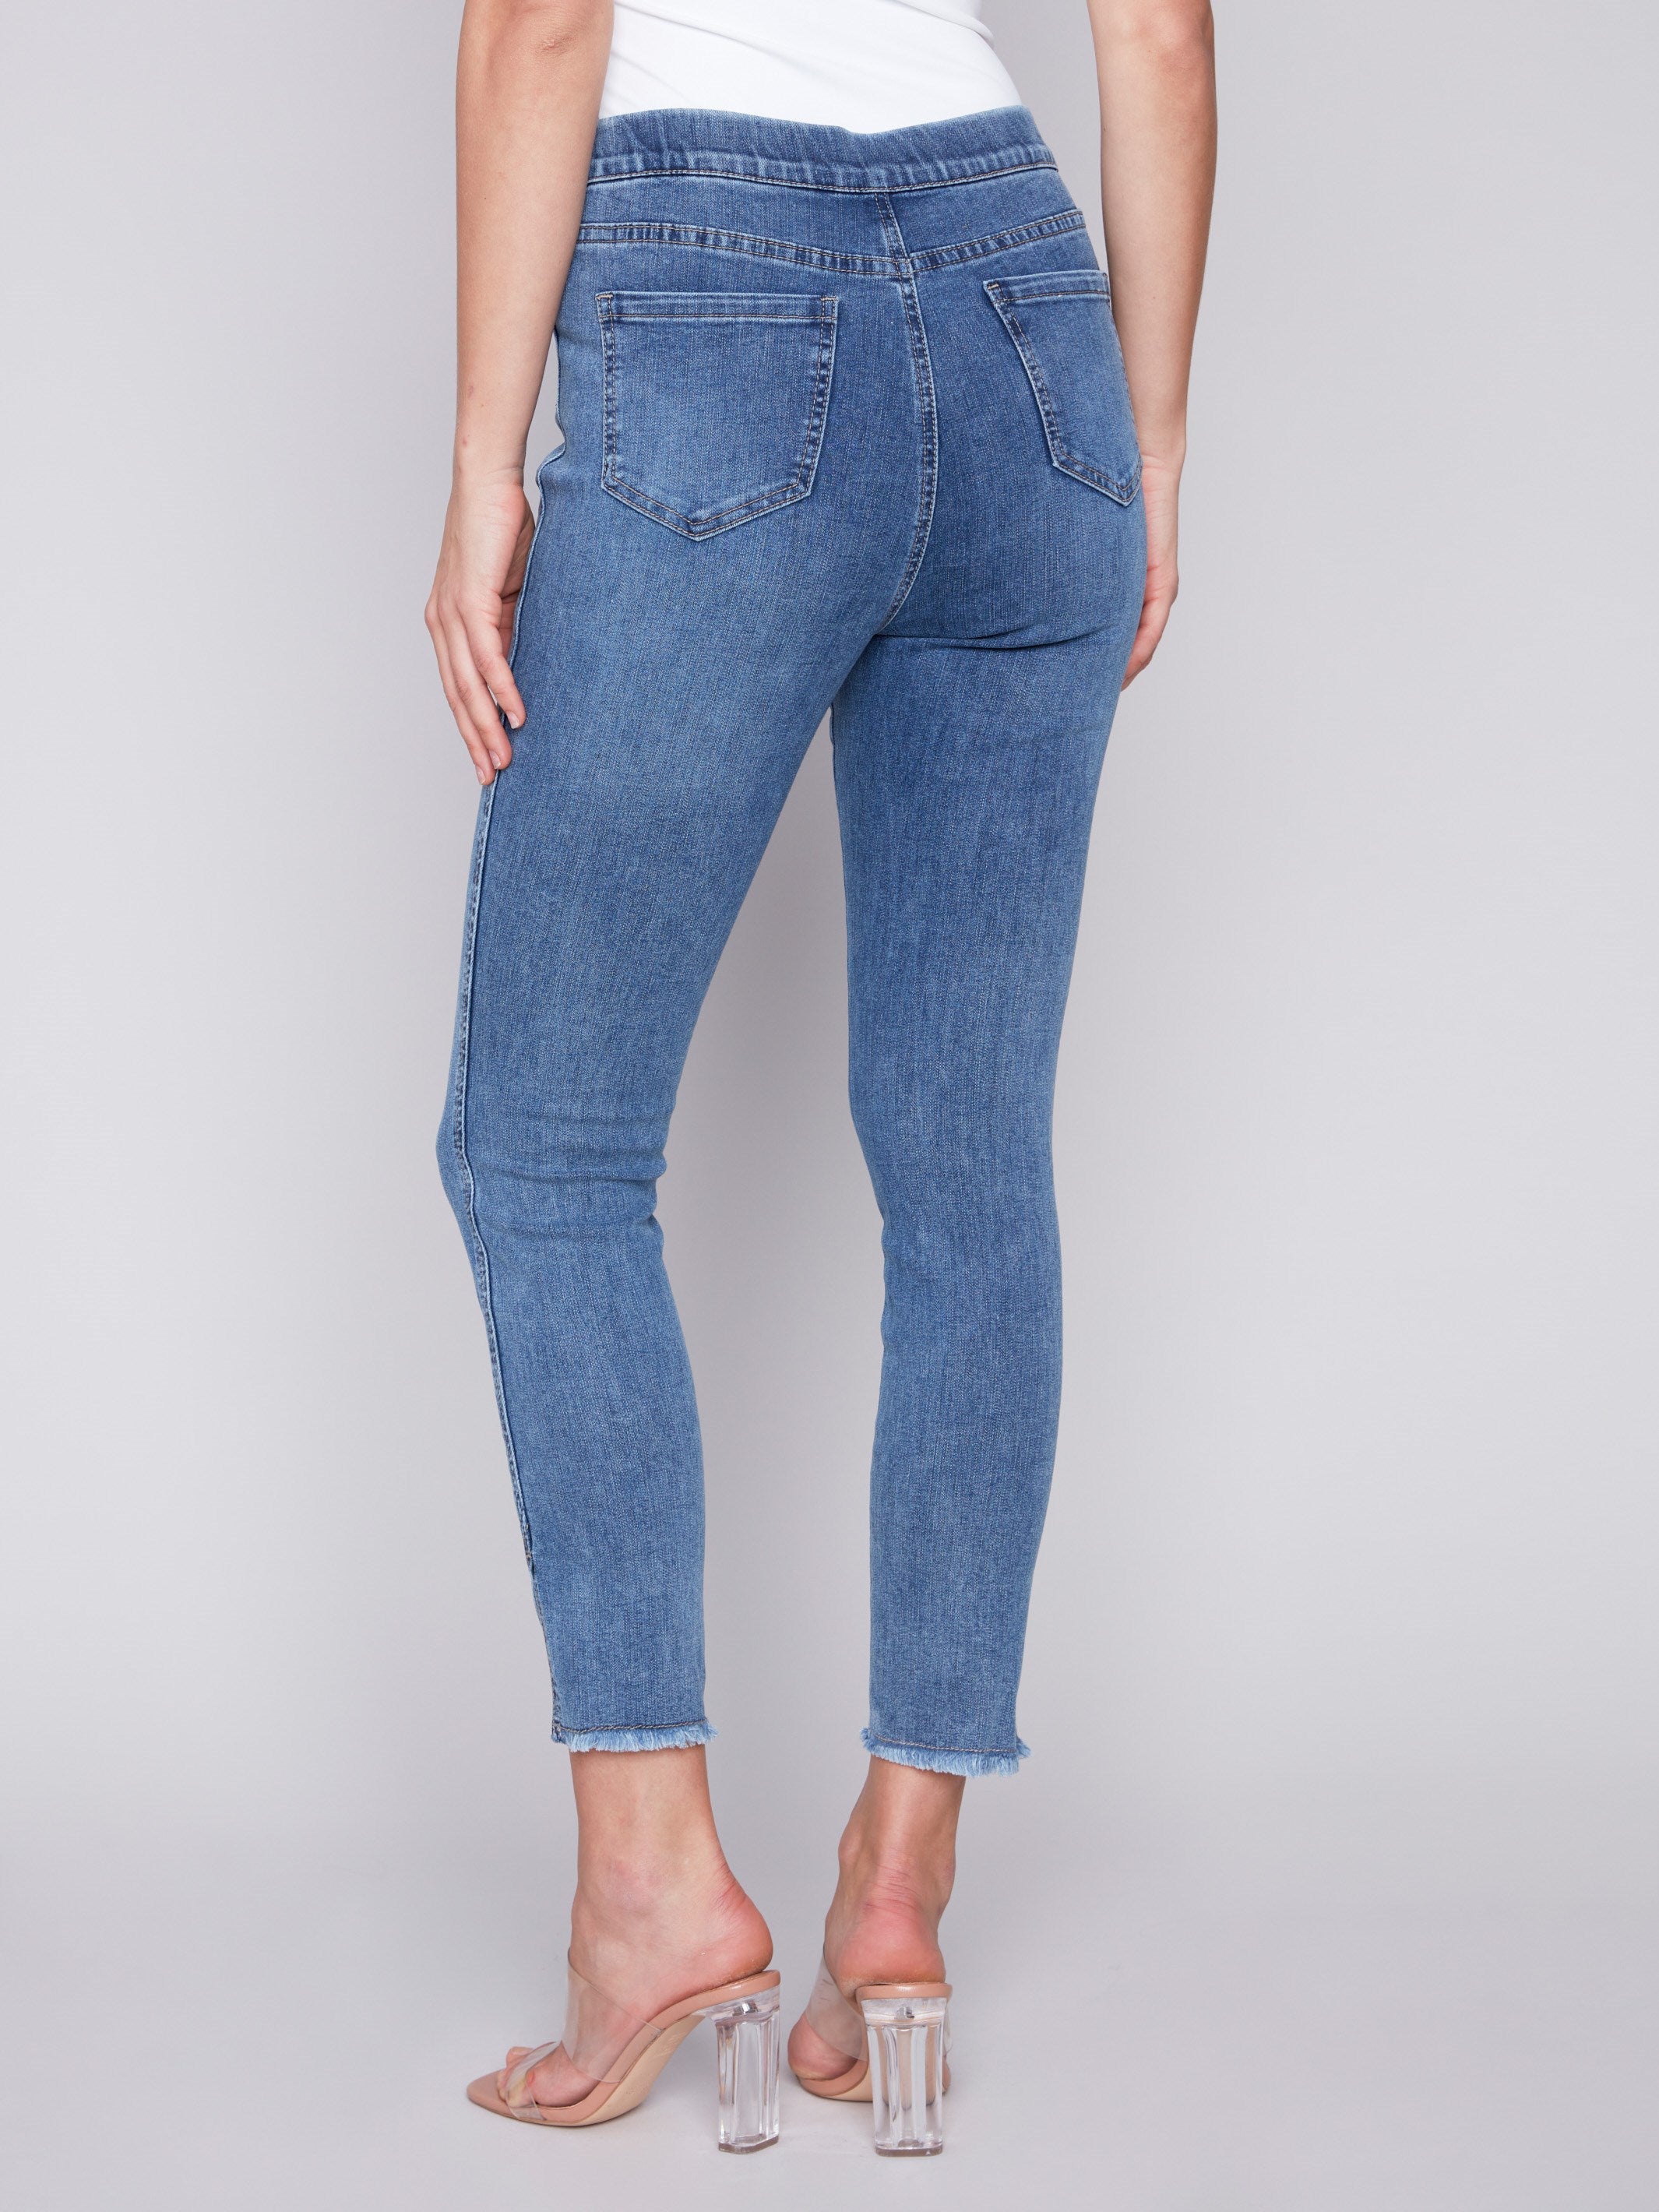 Pull-On Jeans with Split Hem - Medium Blue - Charlie B Collection Canada - Image 3